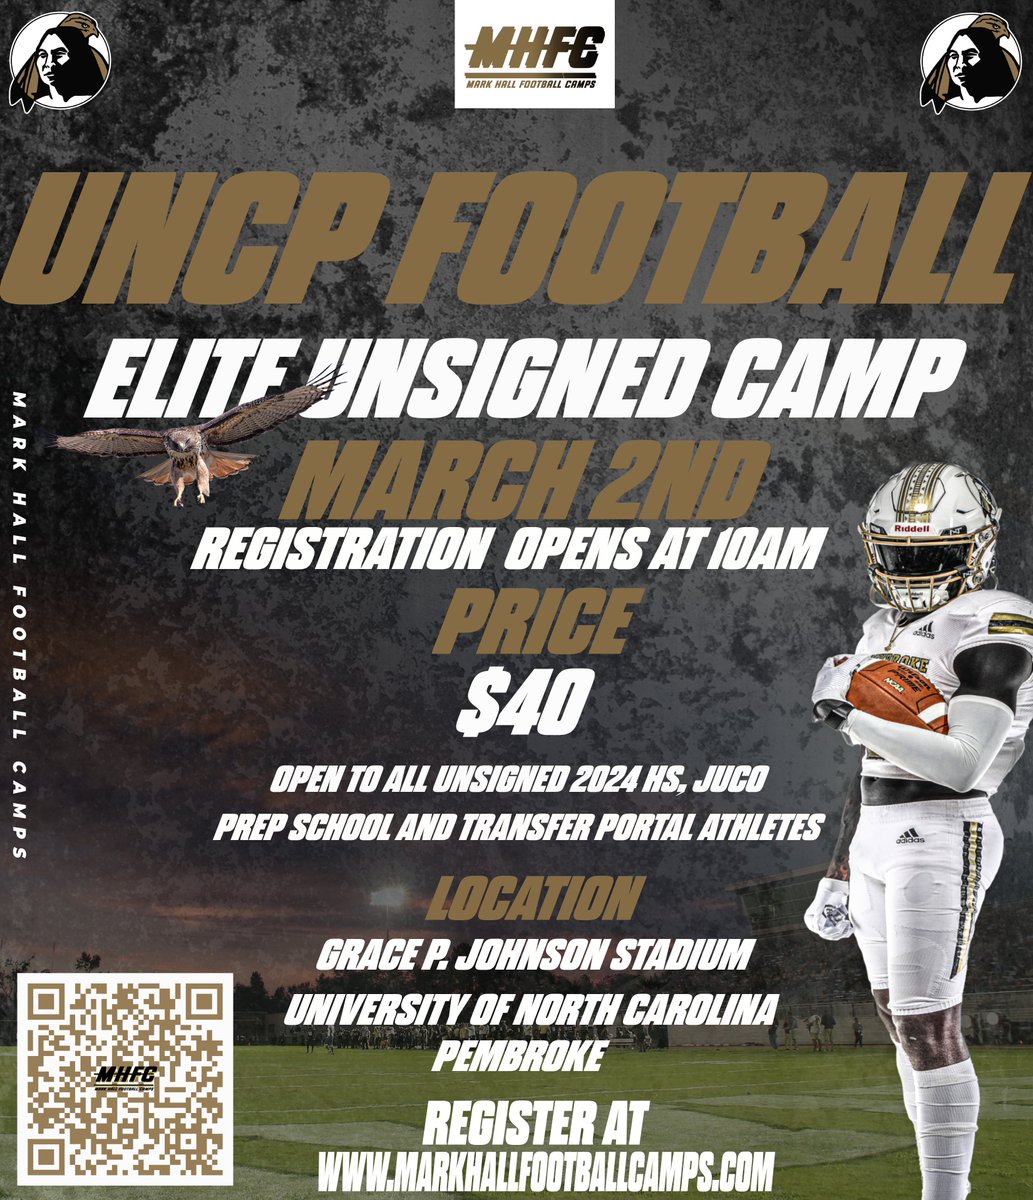 🚨1 WEEK LEFT TO SIGN UP!!! CHEAPEST SCHOOL IN NC & A PROGRAM ON THE RISE!!! DON'T MISS THIS OPPORTUNITY!!! #BraveNation #TheStandard